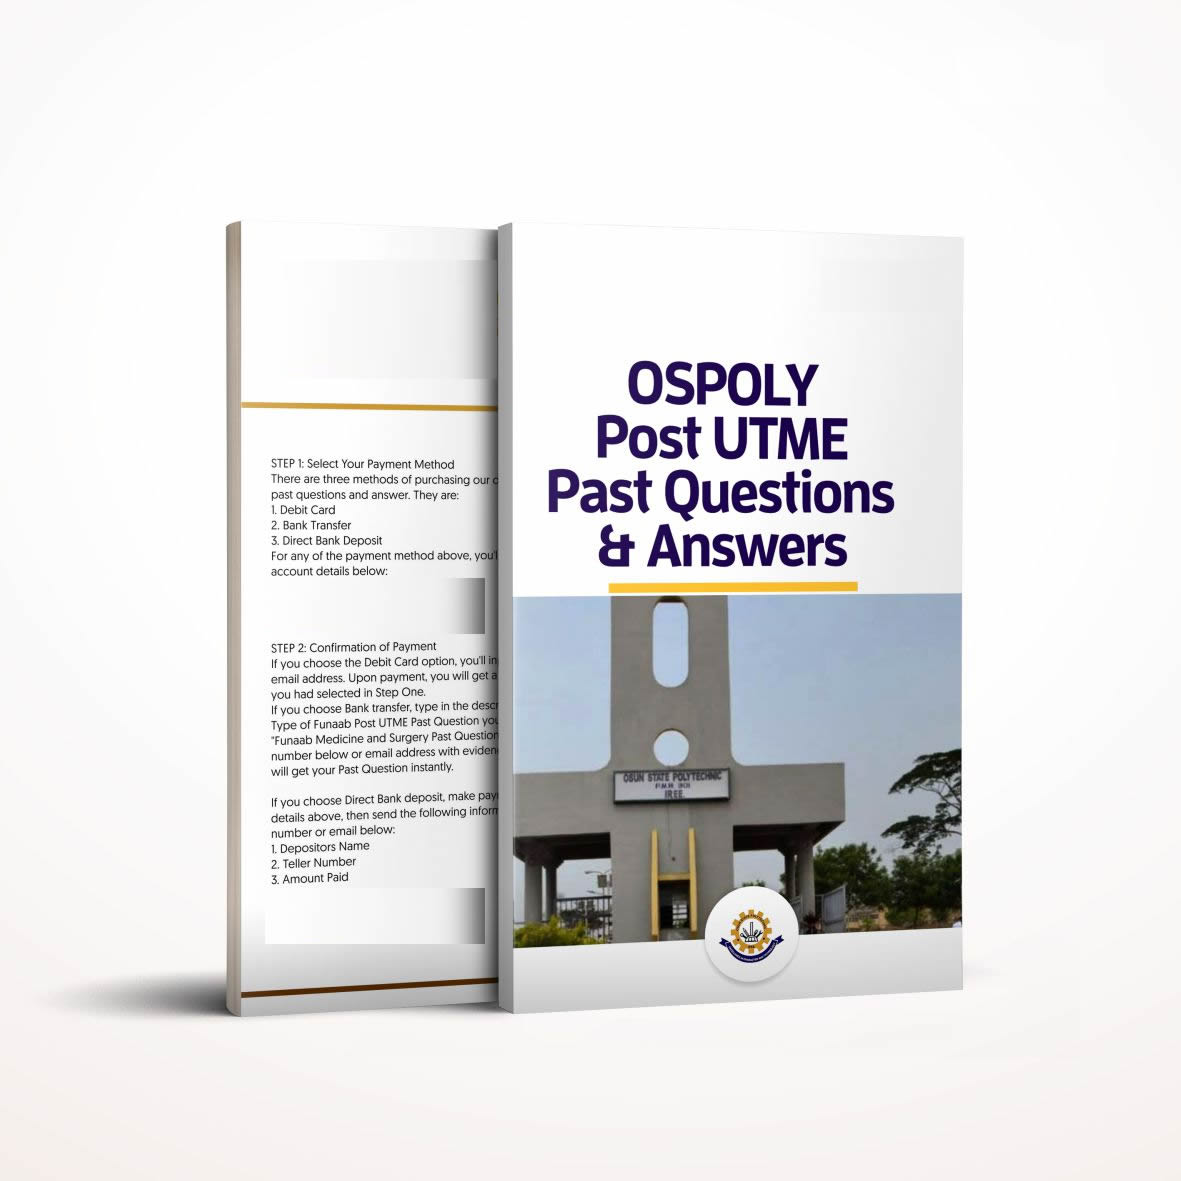 ospoly post utme past questions and answers - Pdf